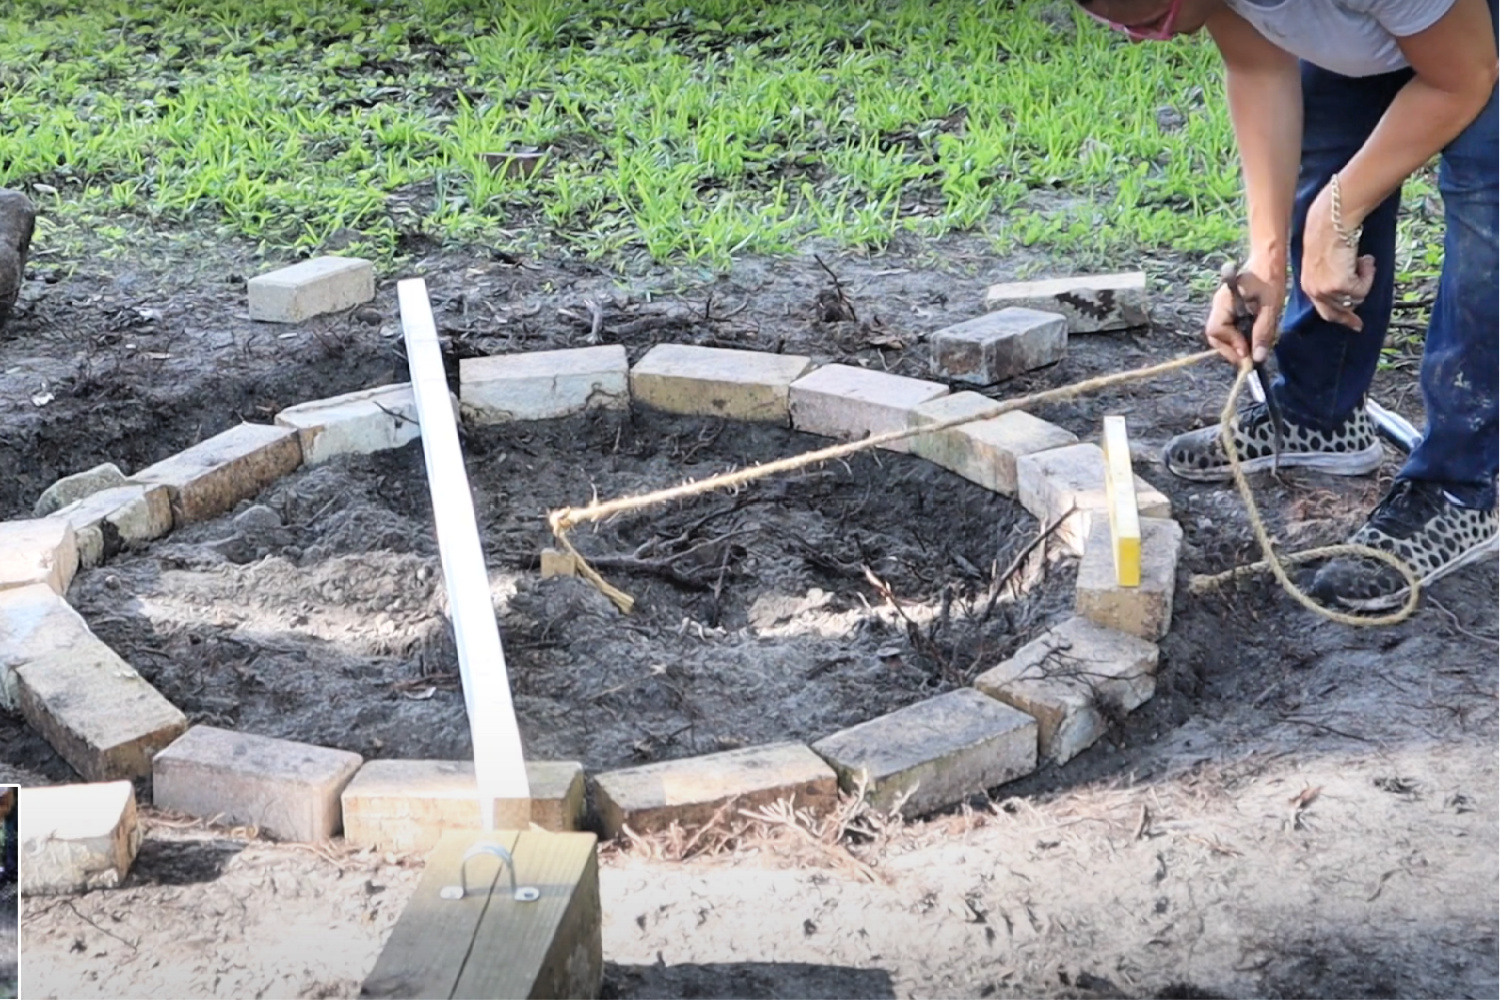 DIY Brick Fire Pit made with leftover fireplace bricks • mimzy & company